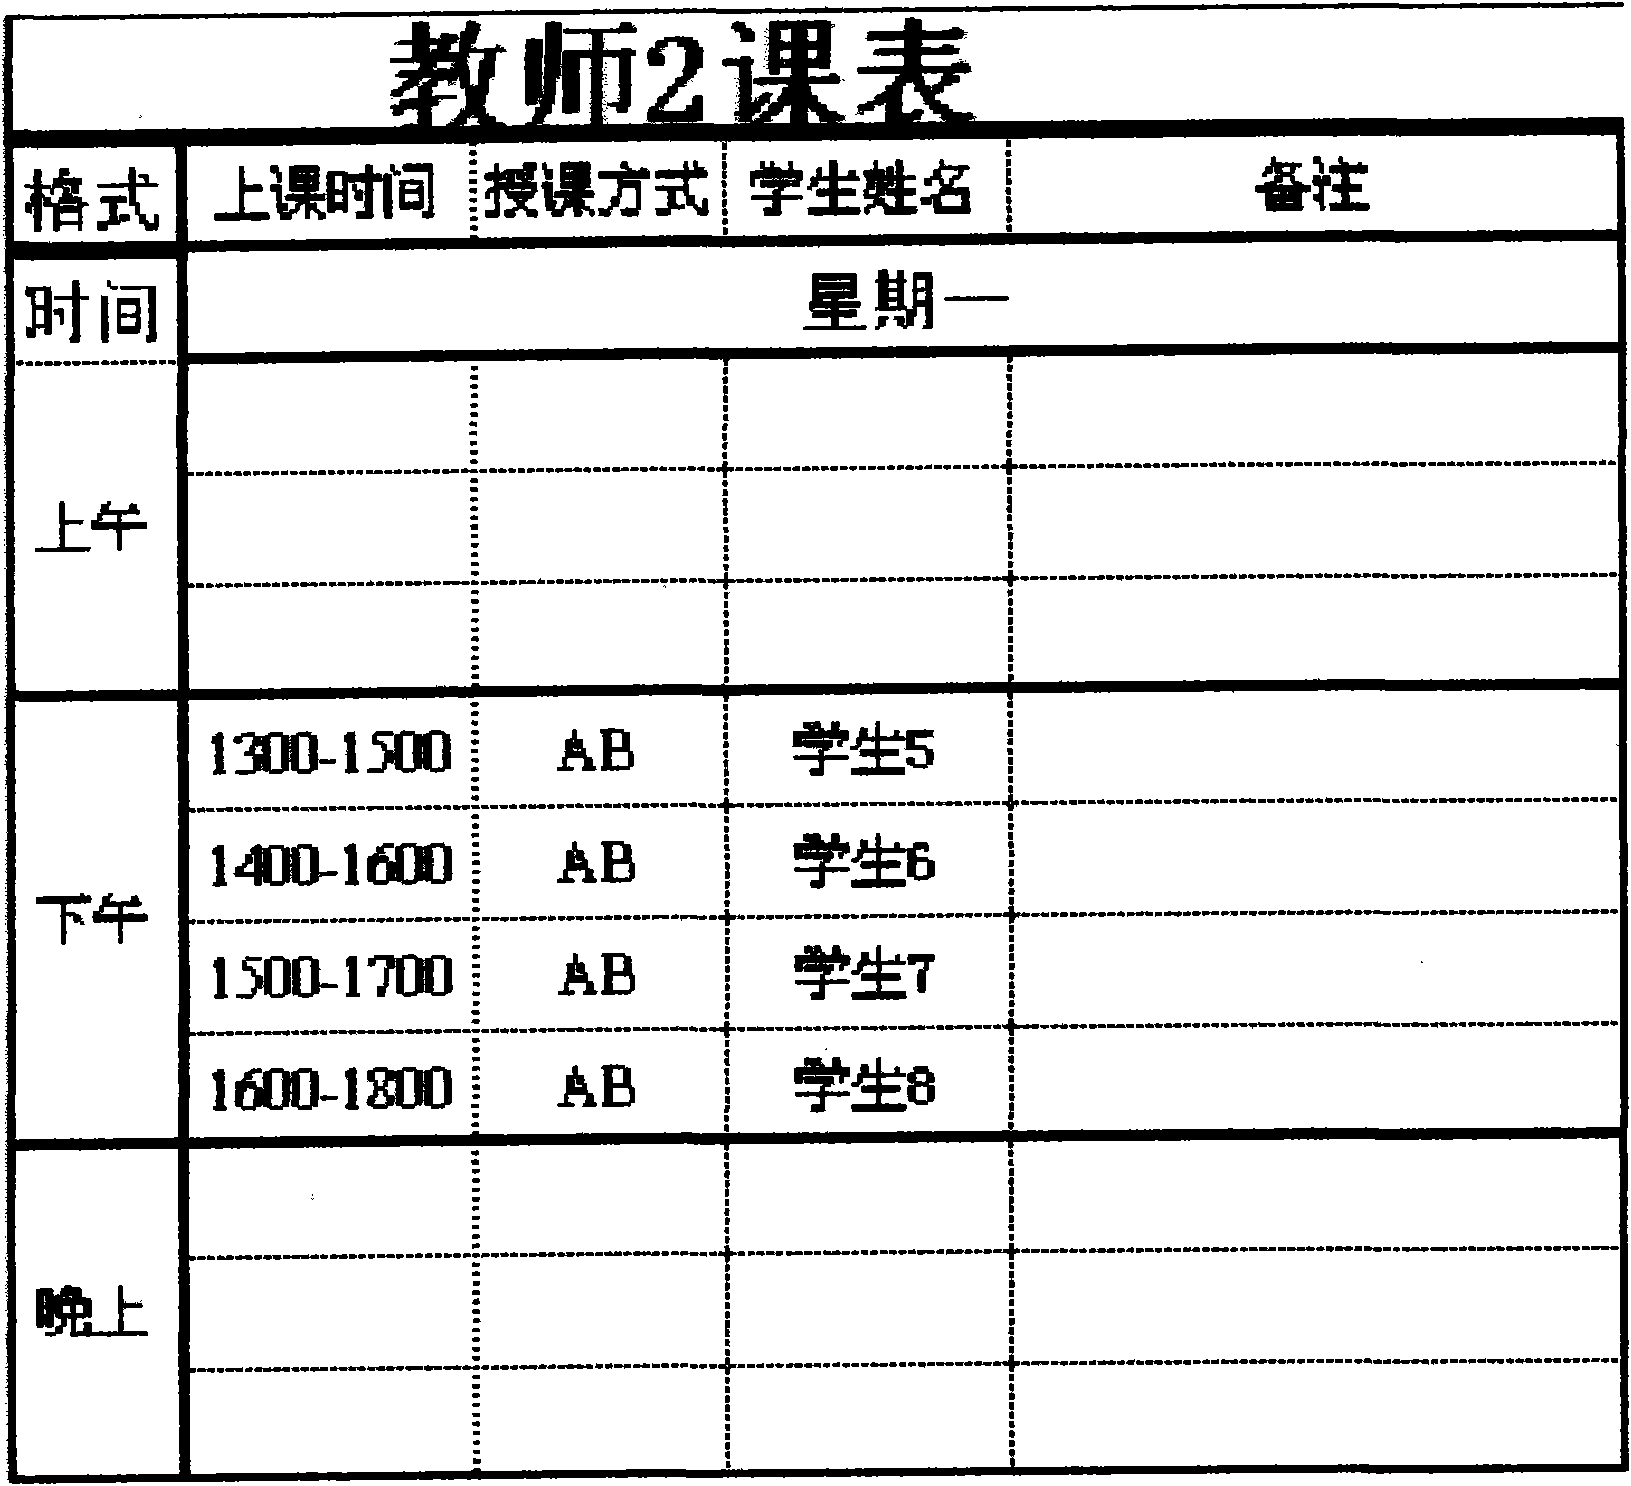 System/method for arranging one-to-one teaching through computer